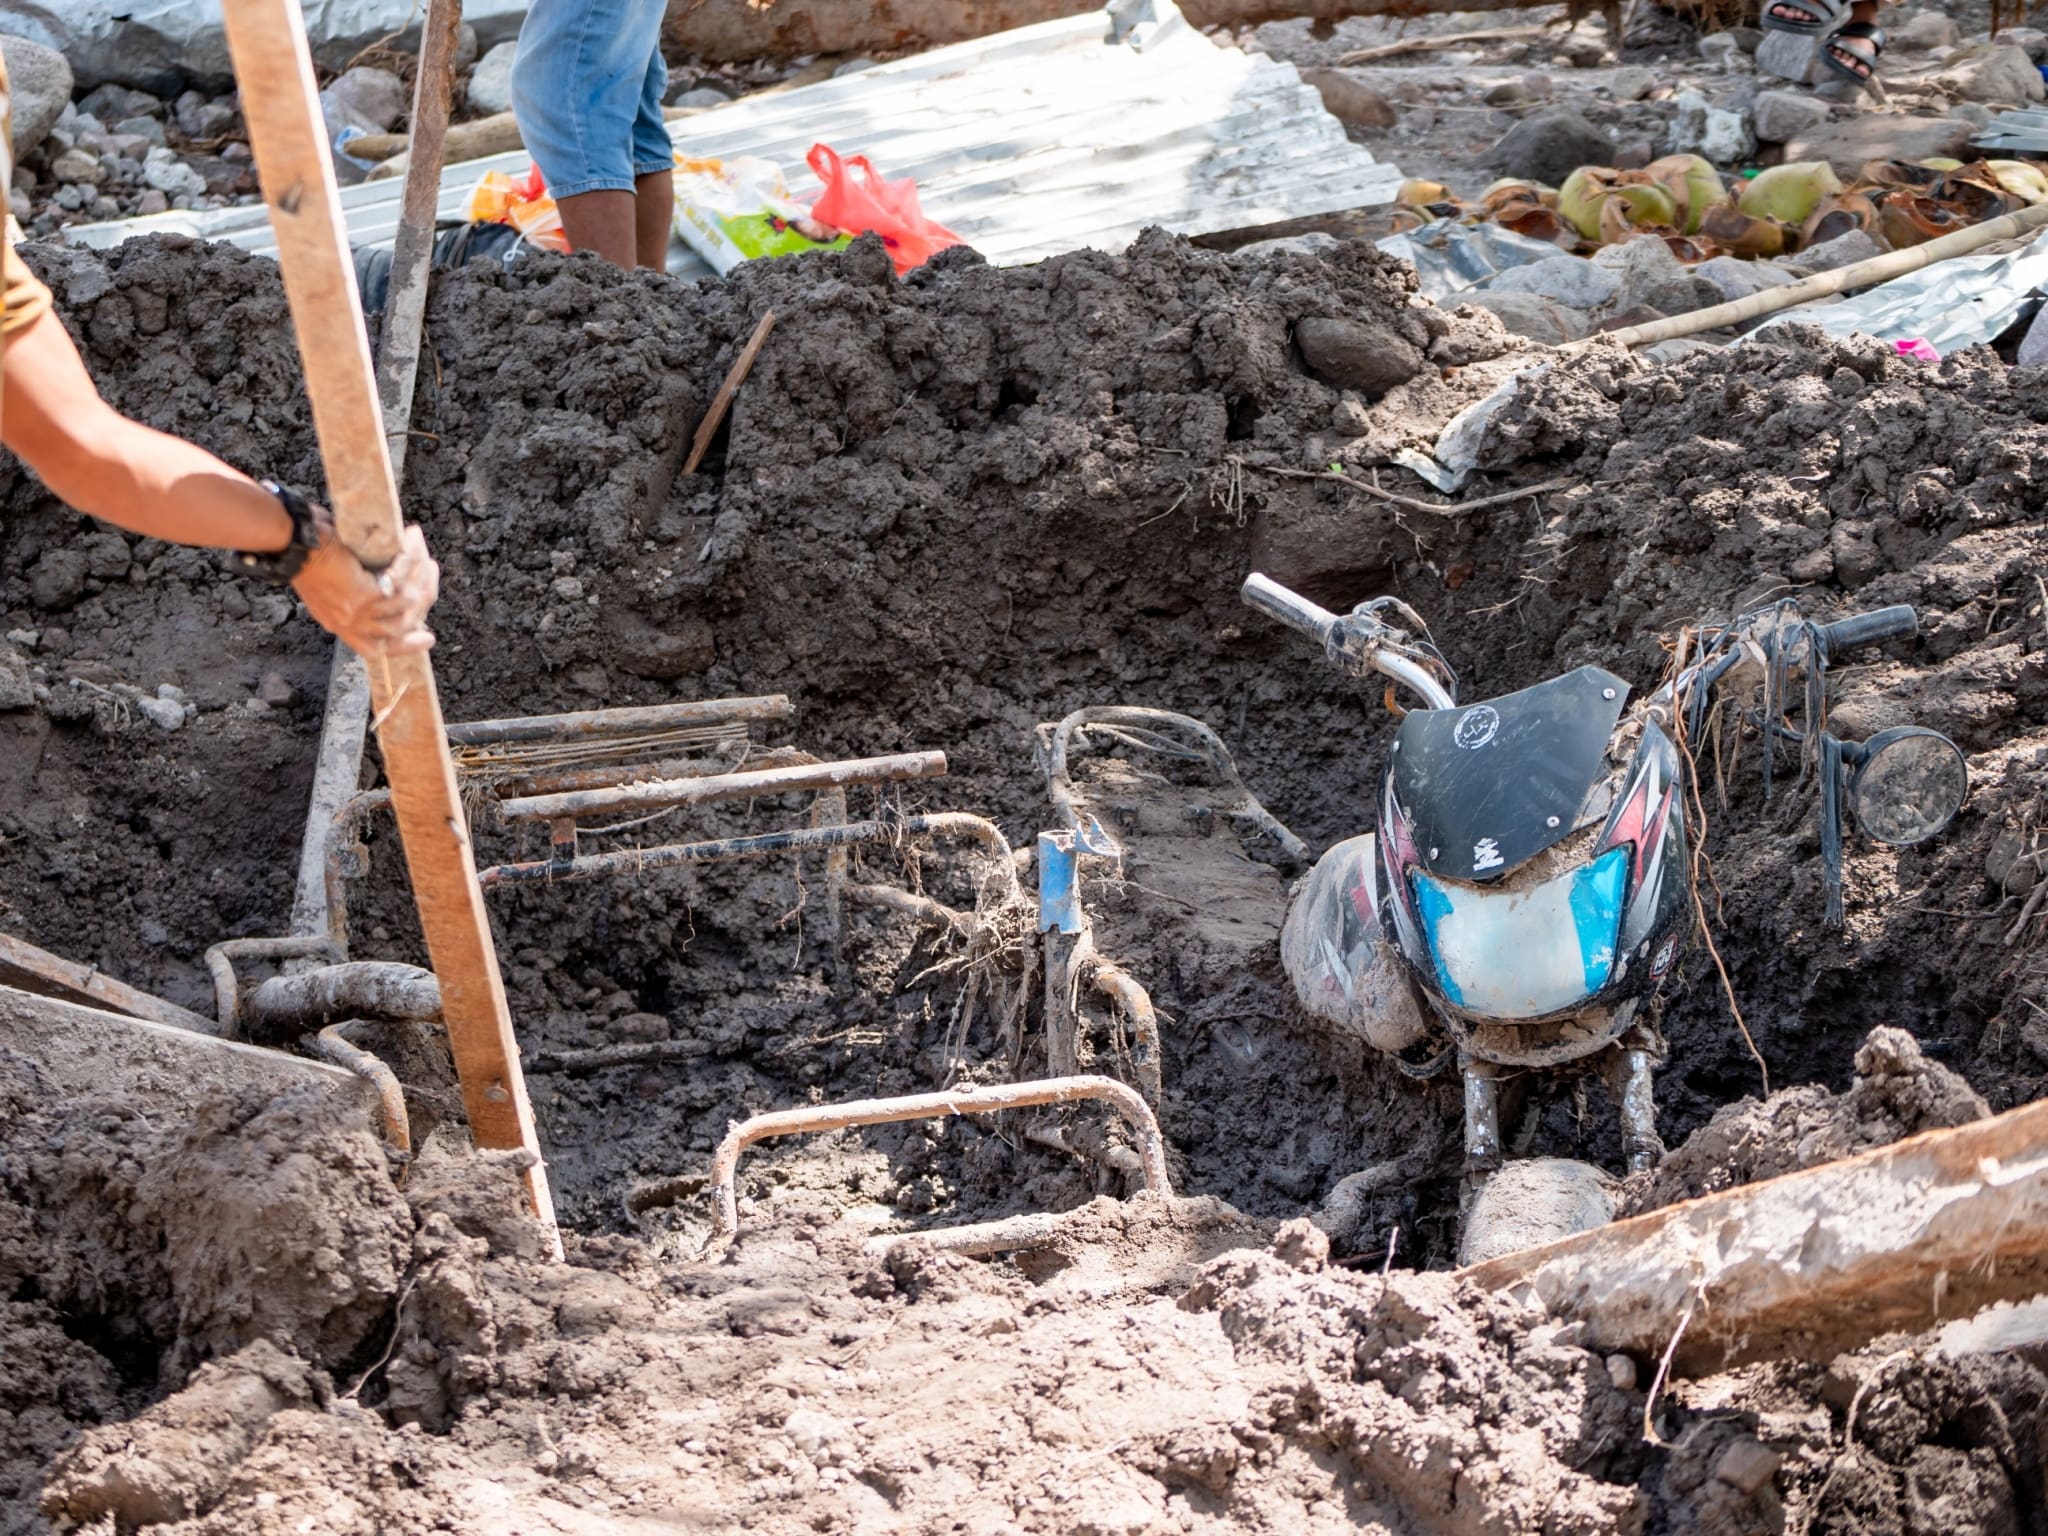 Residents try to rescue a motorcycle sidecar buried by mud. 【Photo by Daniel Lazar】